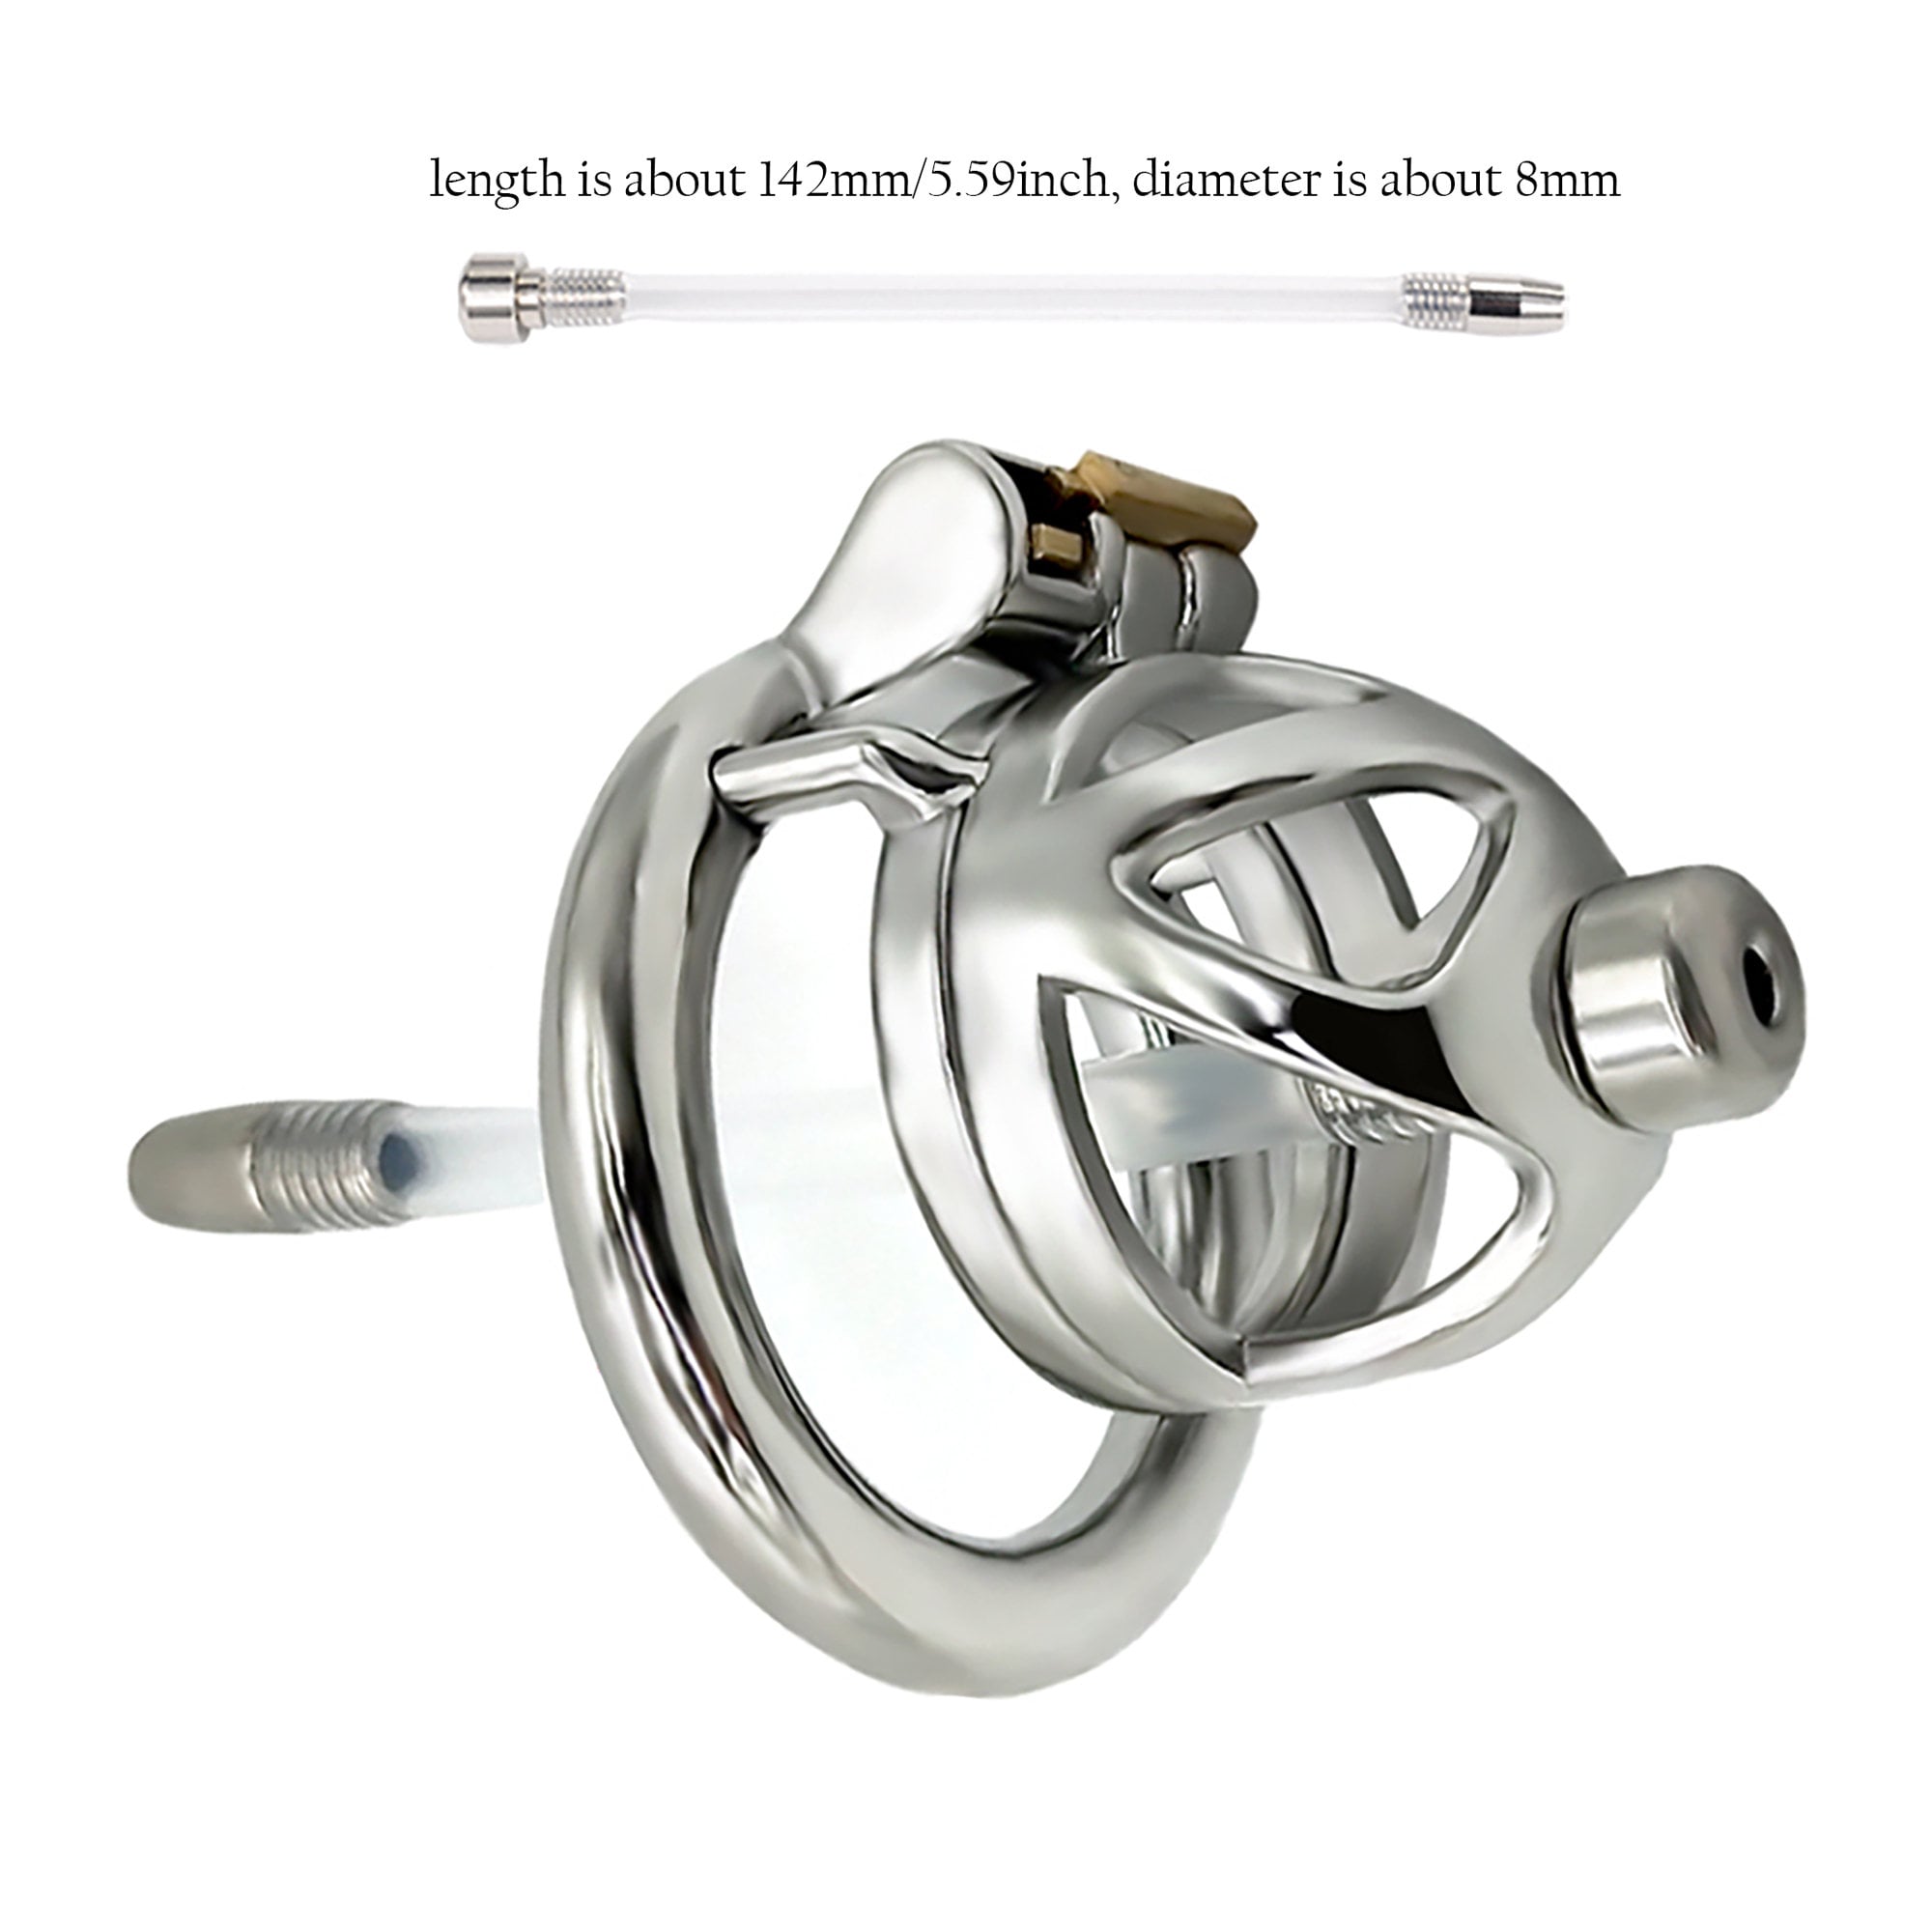 Small Chastity Belt Lock for Men Metal Cock Cage With Urethral photo